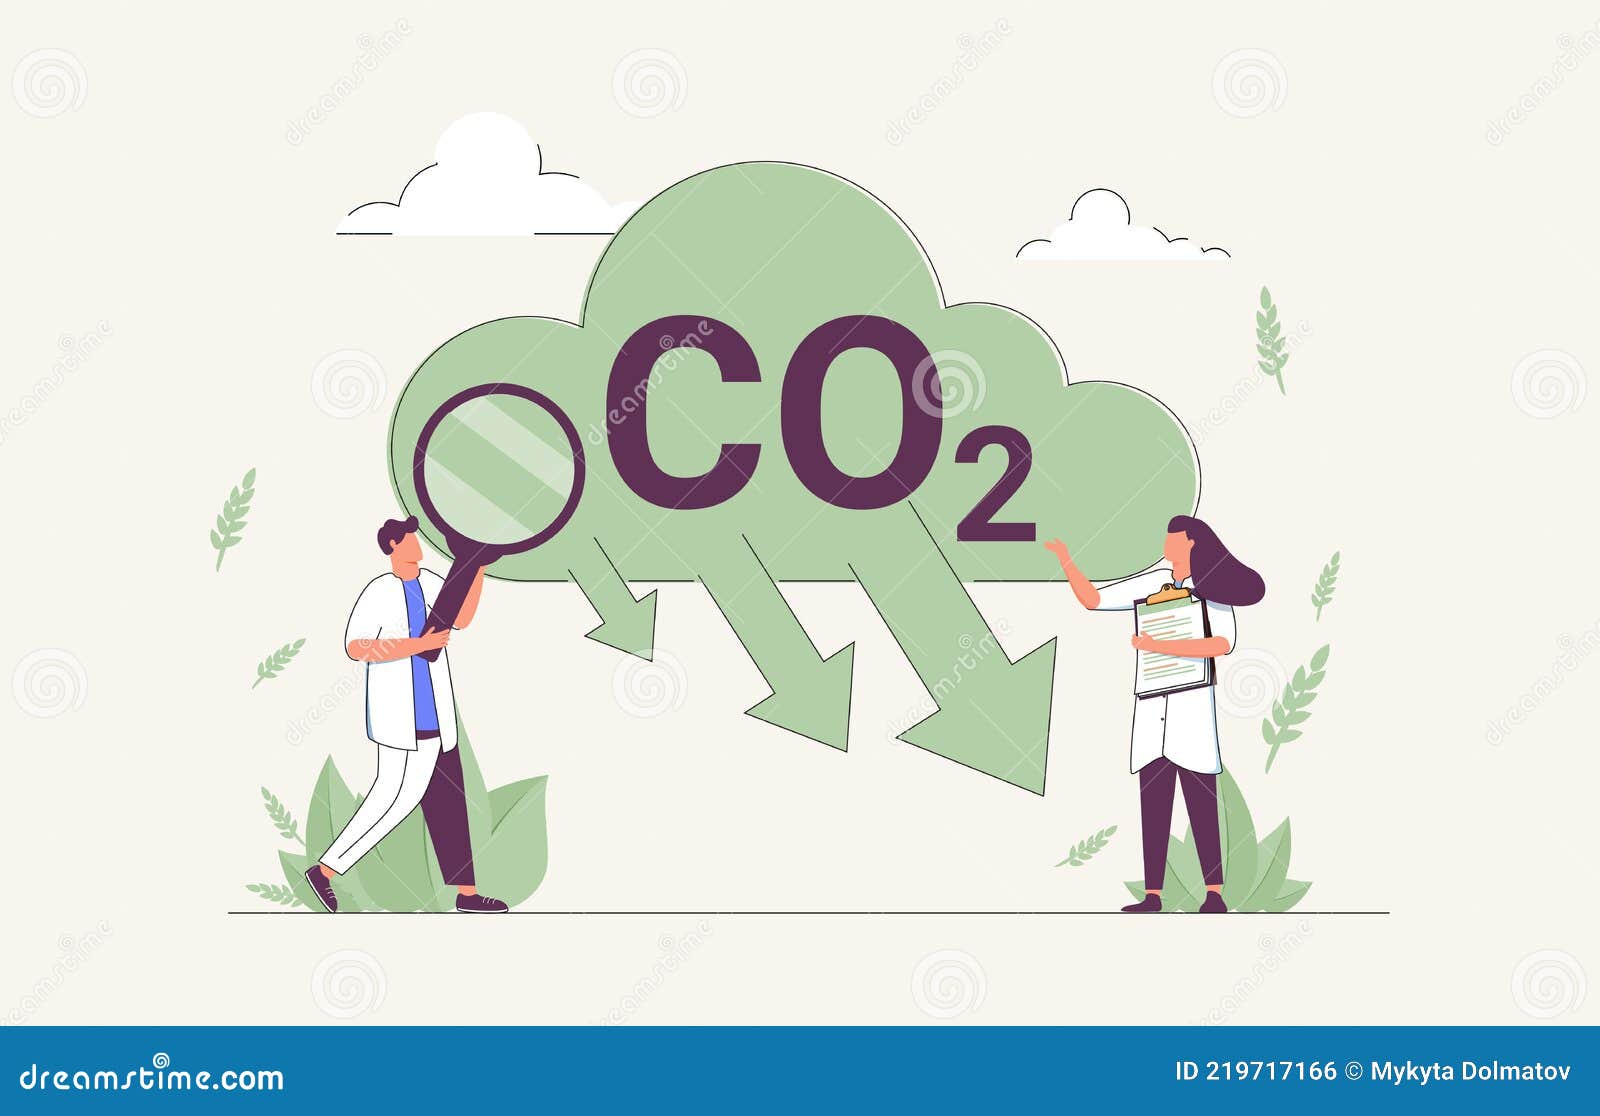 co2 reduction to reduce carbon dioxide greenhouse gases tiny person concept. alternative energy usage to eliminate